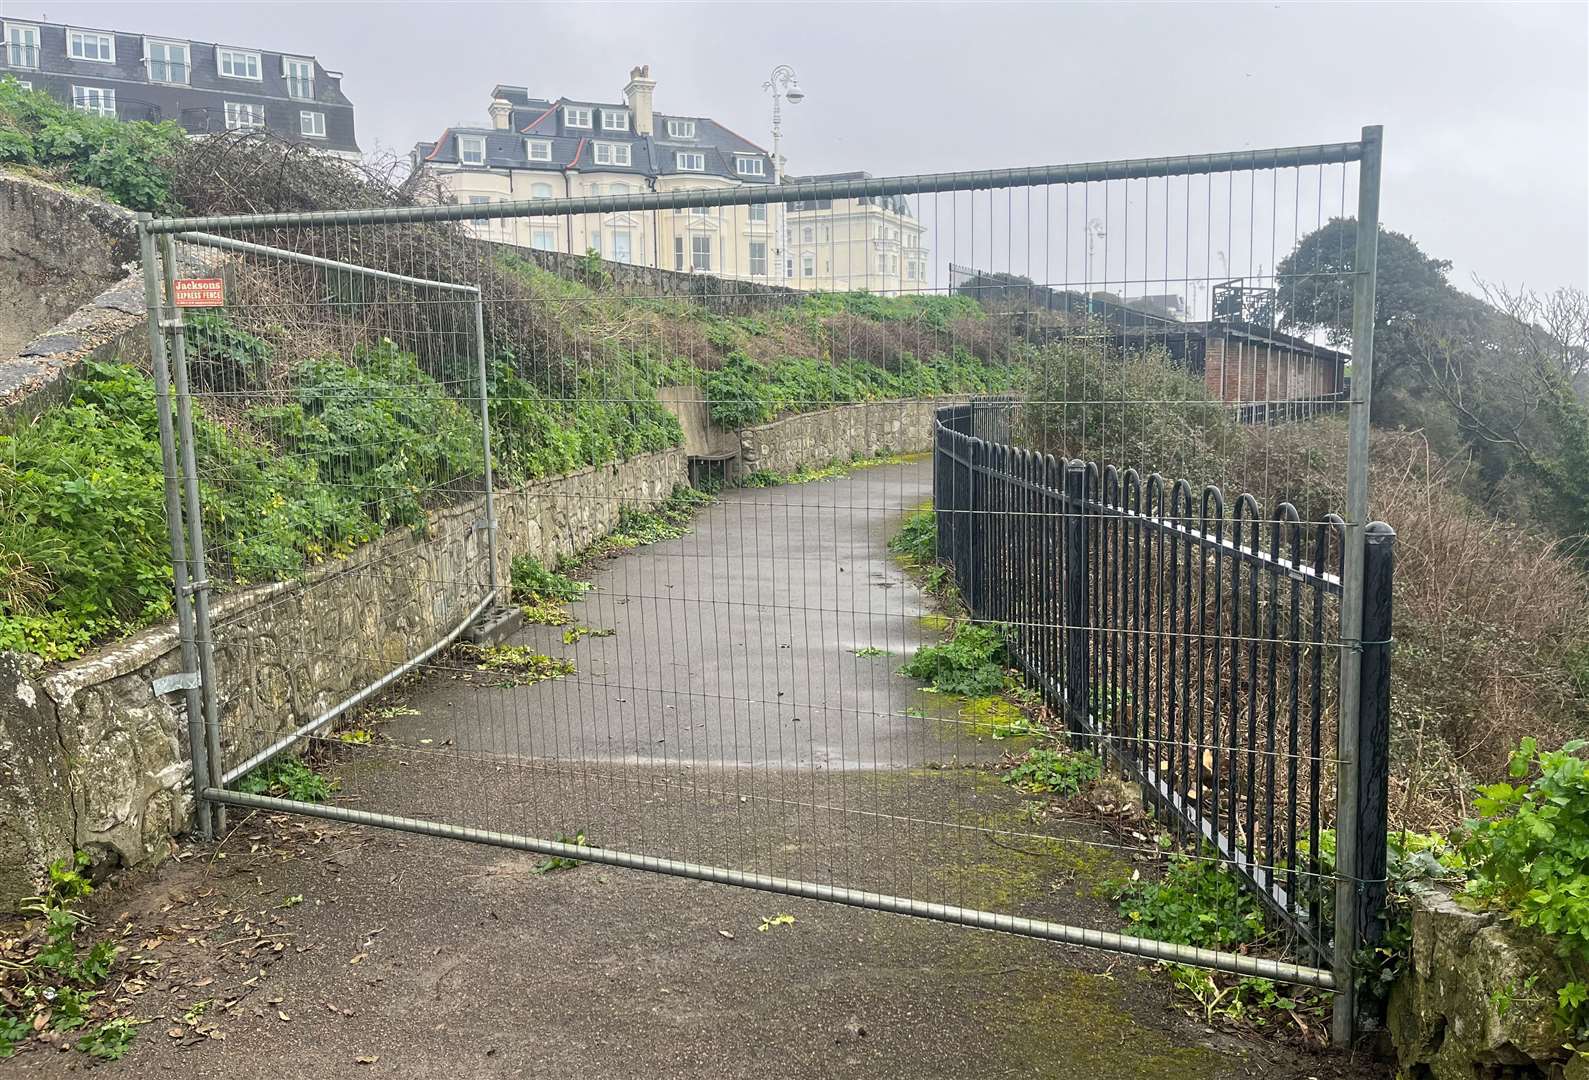 The closure follows fears for public safety with the adventure playground directly below the coastal path